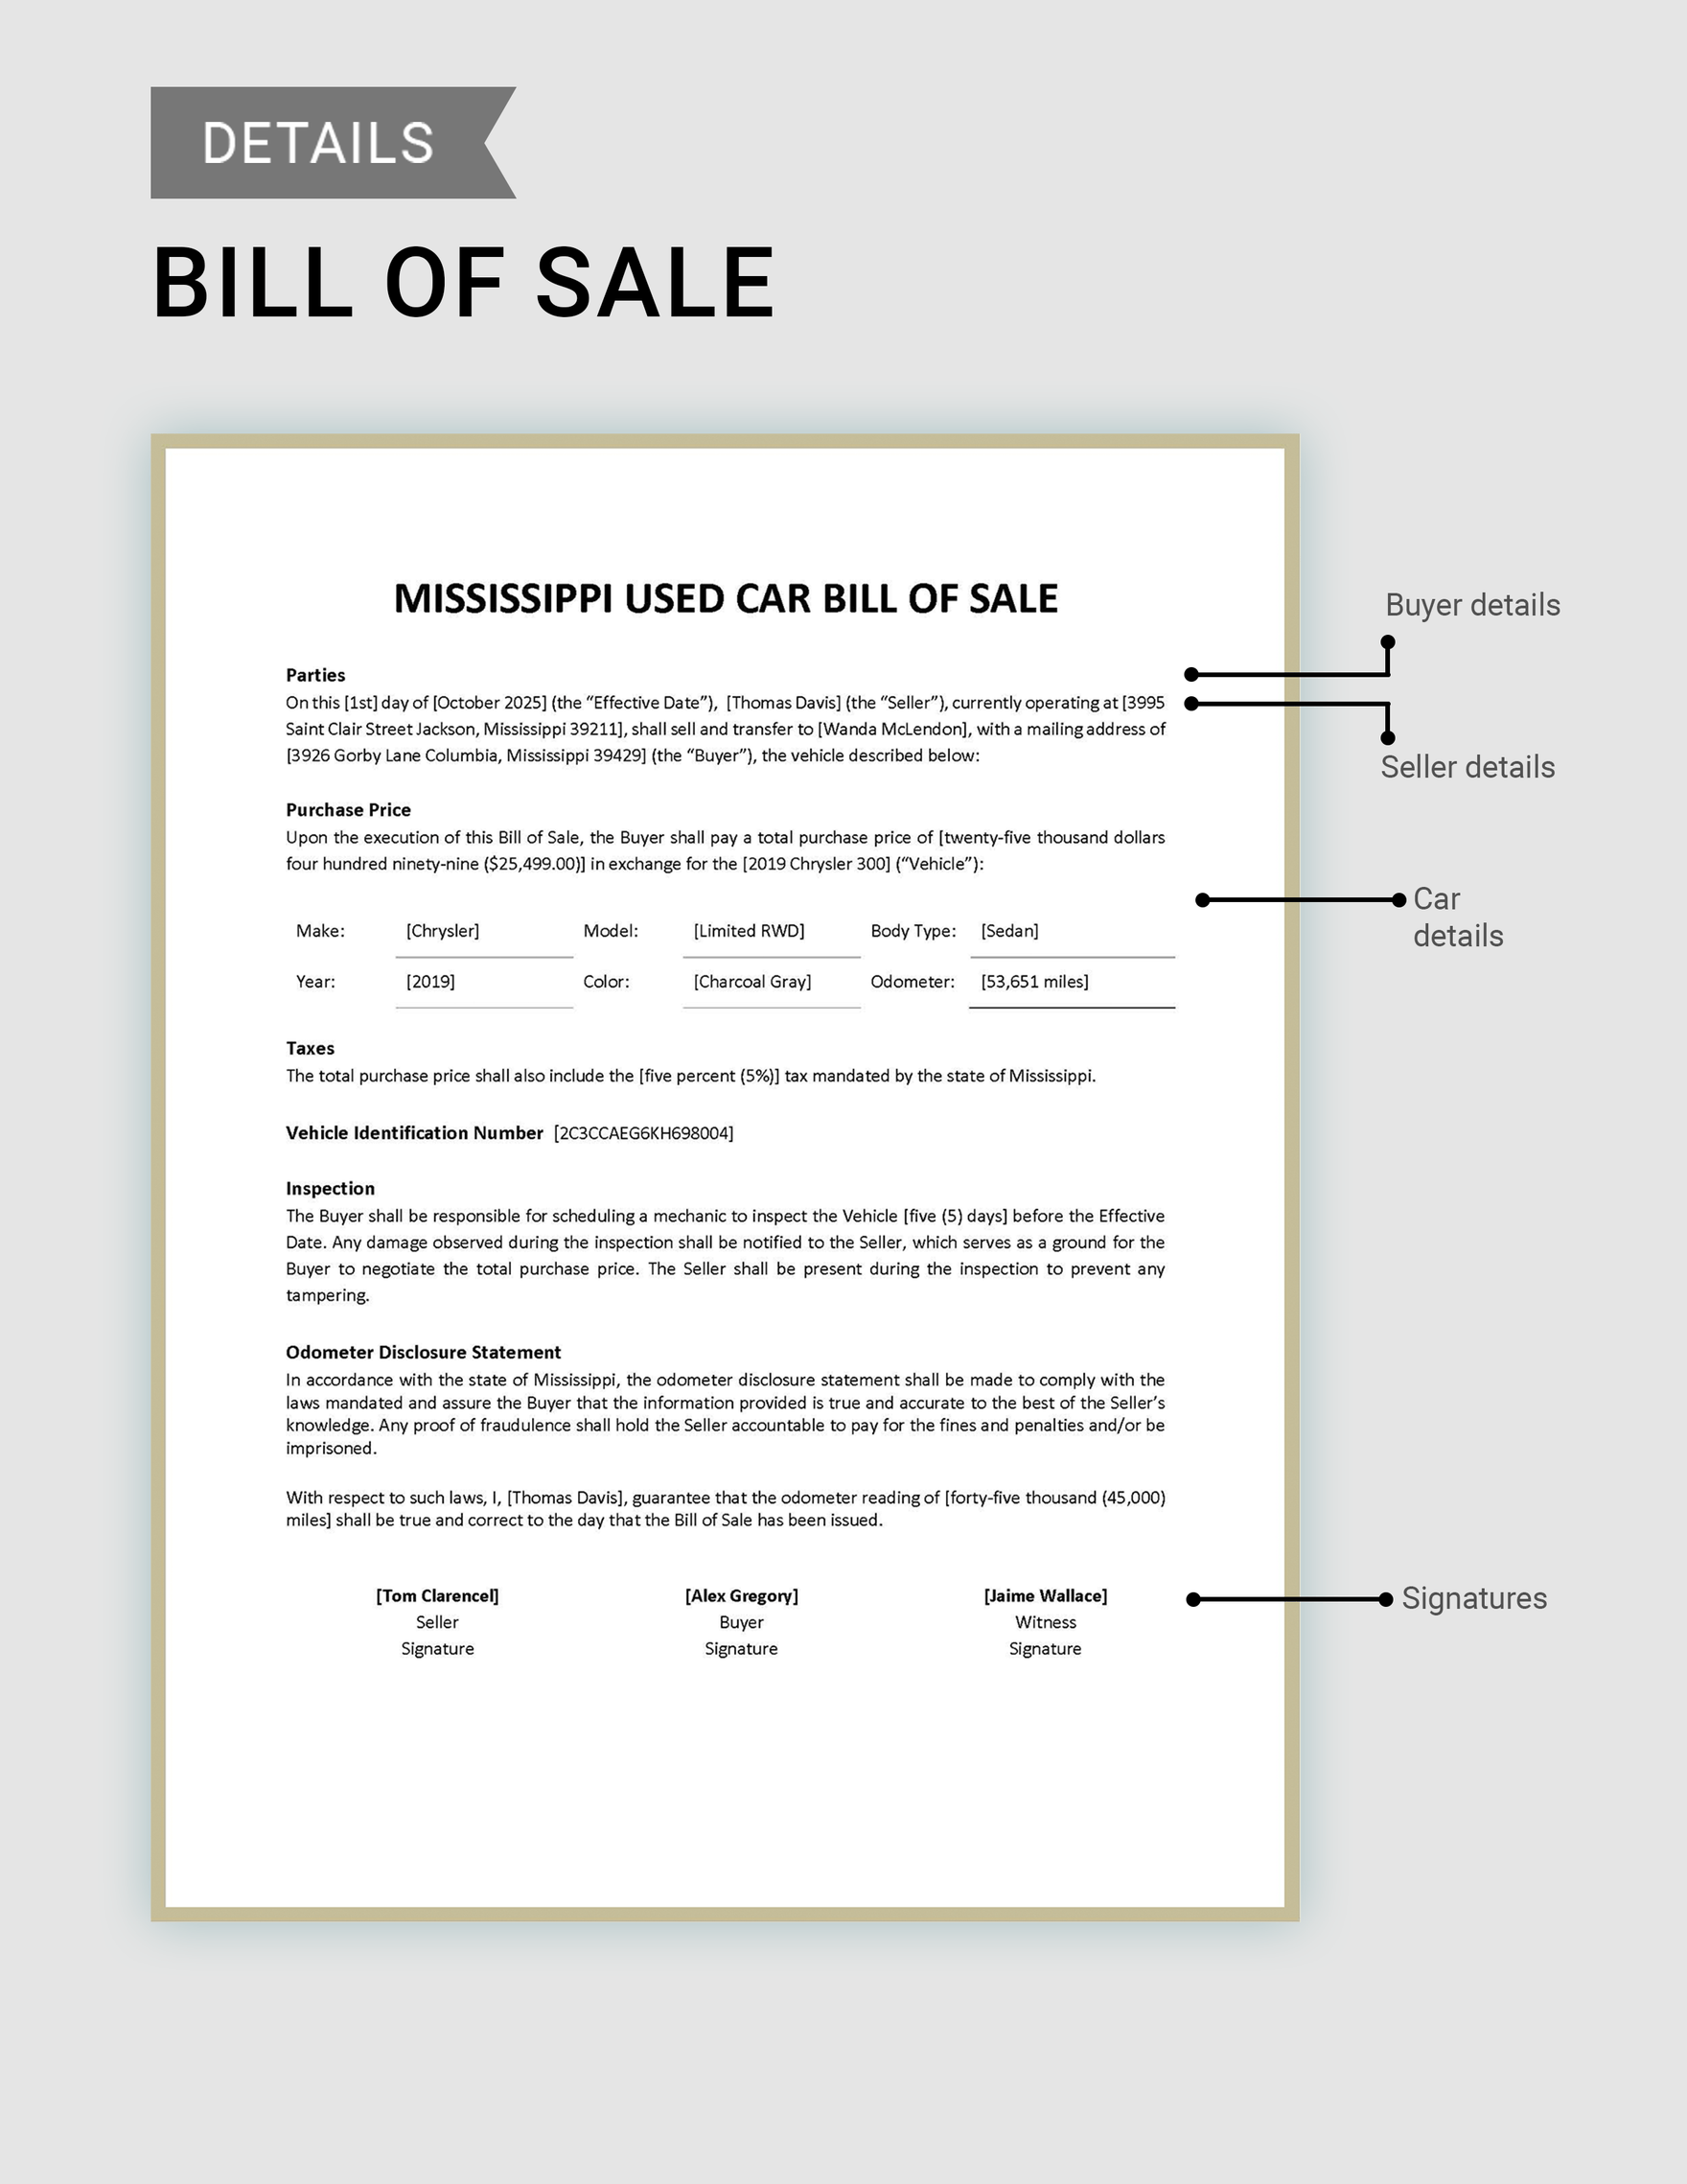 Mississippi Used Car Bill of Sale Form Template